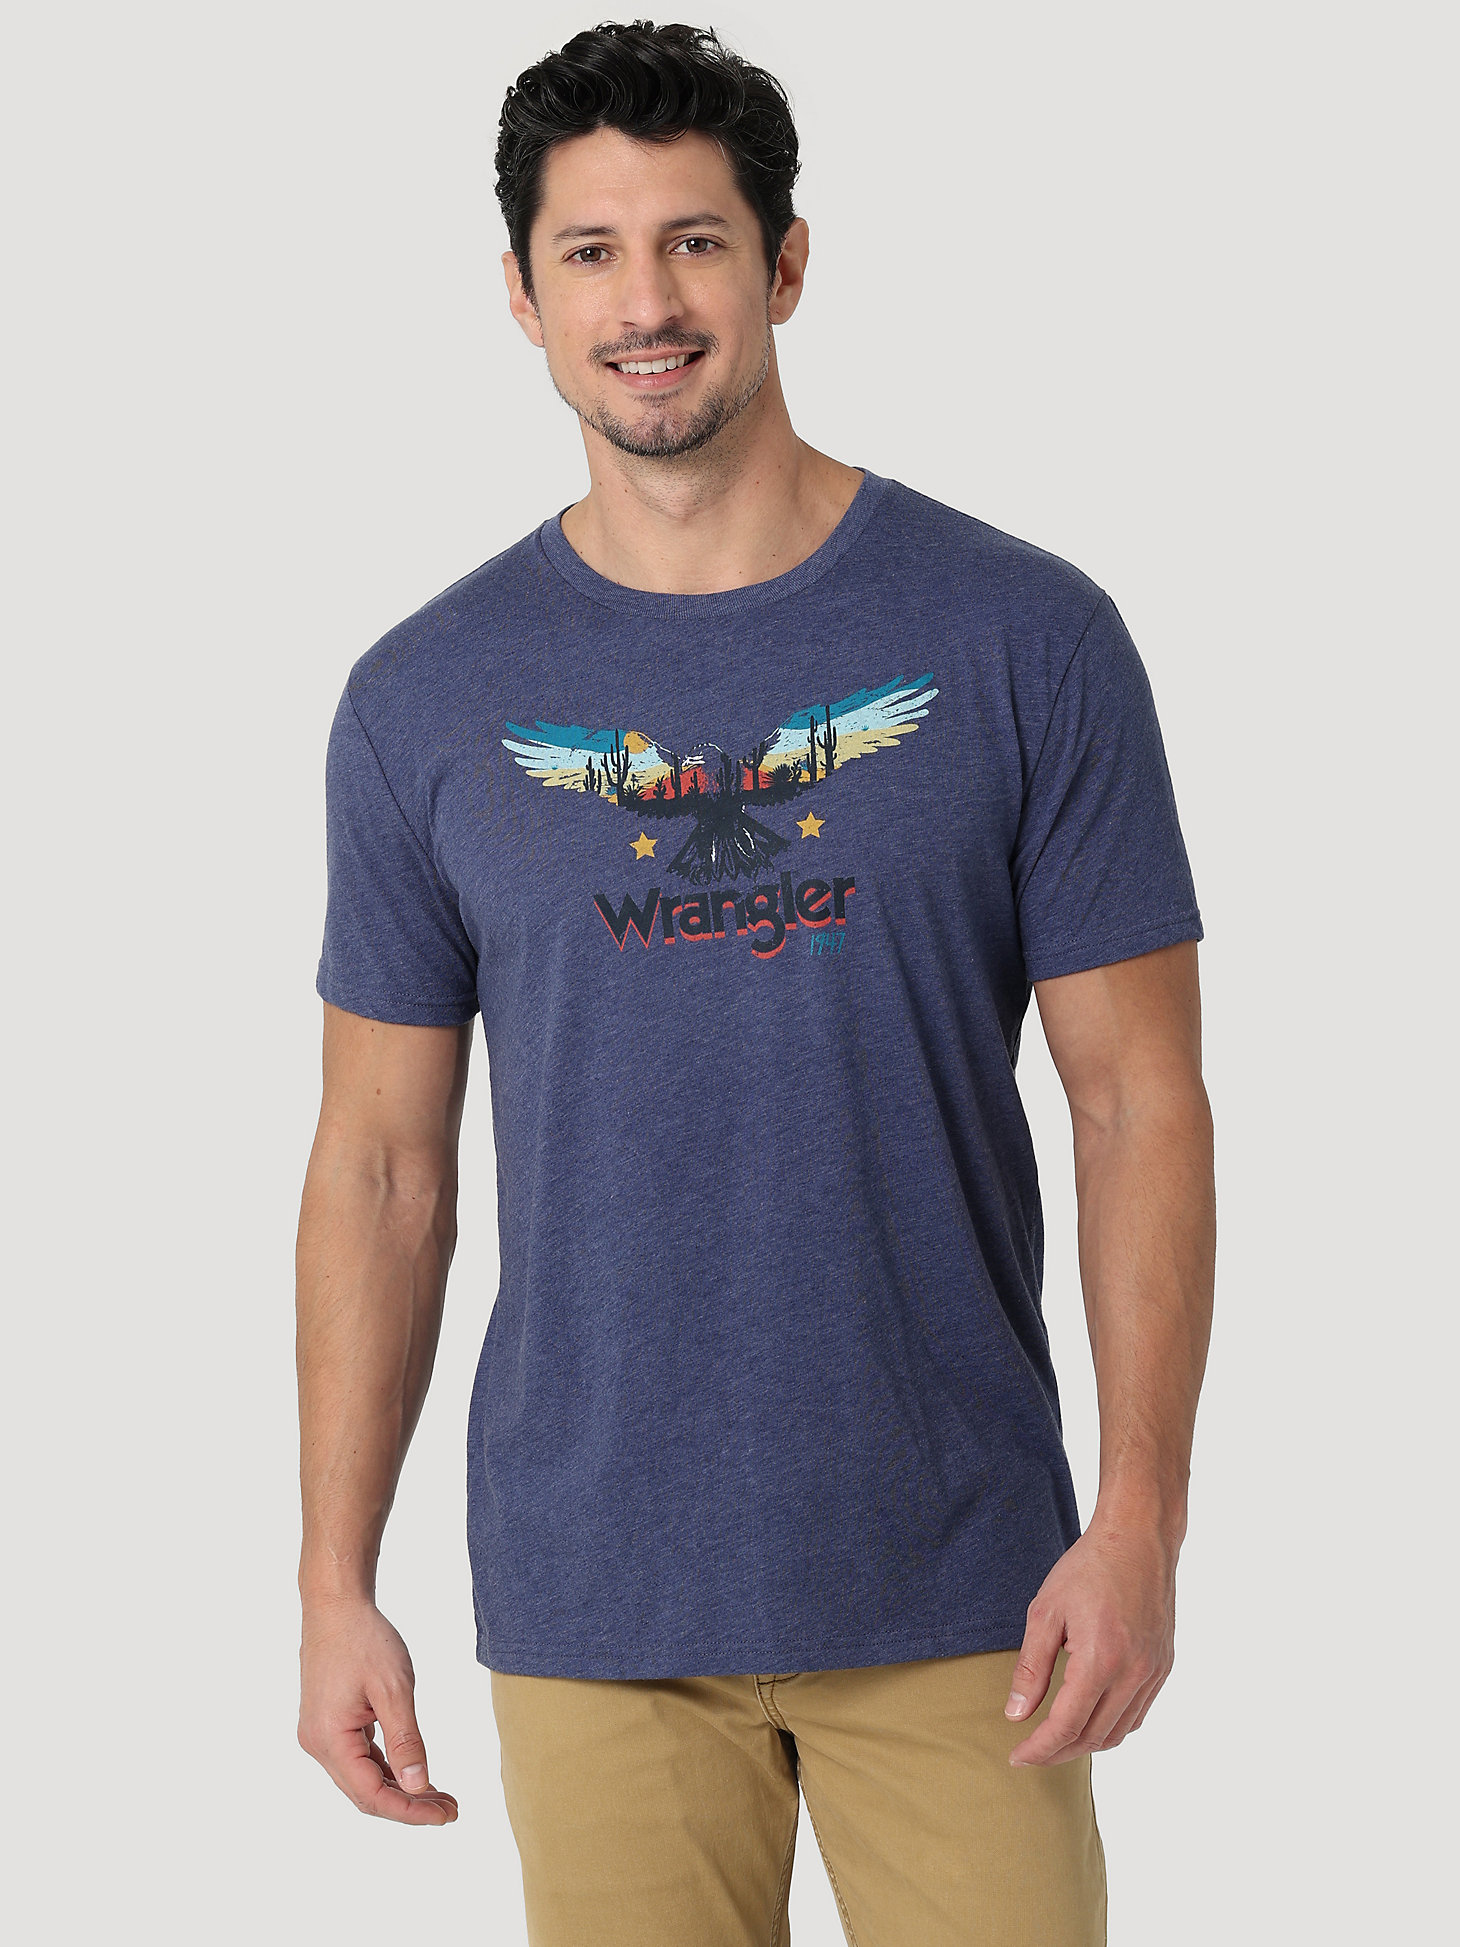 Men's Flying Eagle Graphic T-Shirt in Denim Heather main view